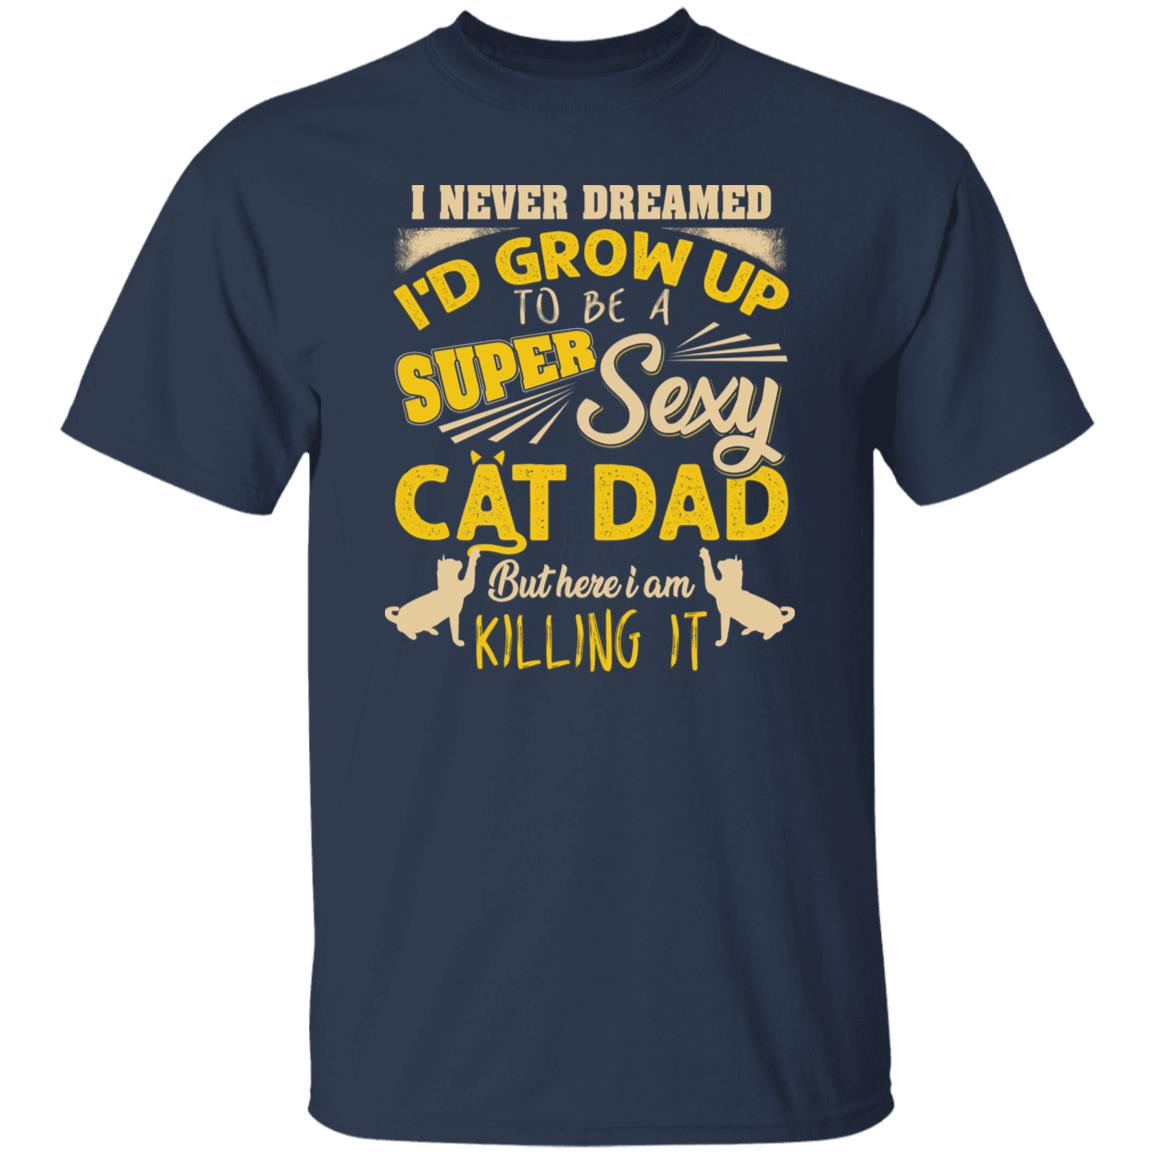 Sexy Cat Dad T-Shirt gift I never dream to be Cat dad Unisex Tee Black Navy Dark Heather-Navy-Family-Gift-Planet